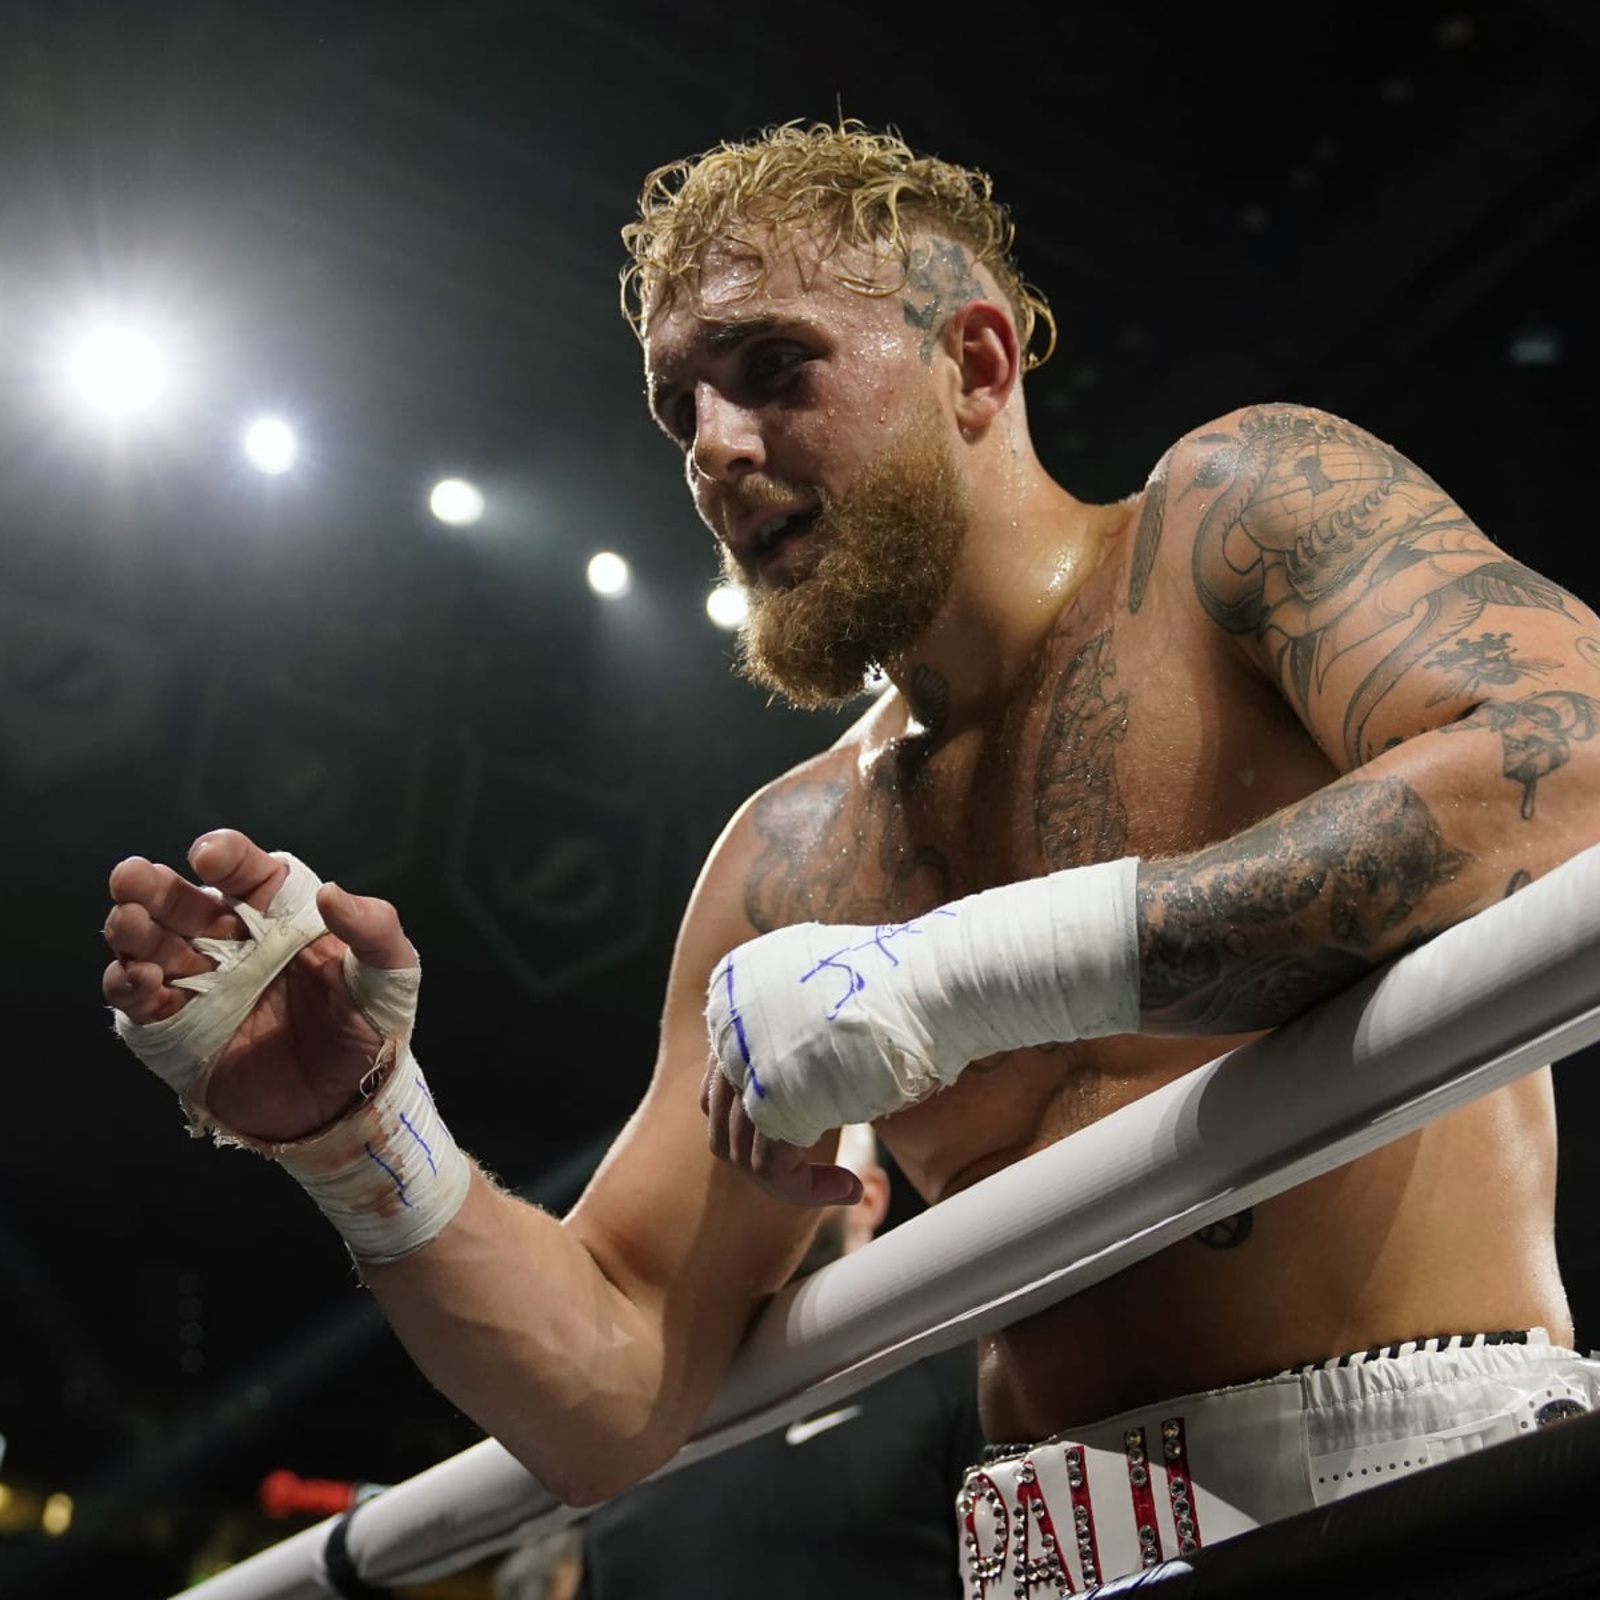 Boxing: Jake Paul challenges Floyd Mayweather, wants to take his  undefeated record